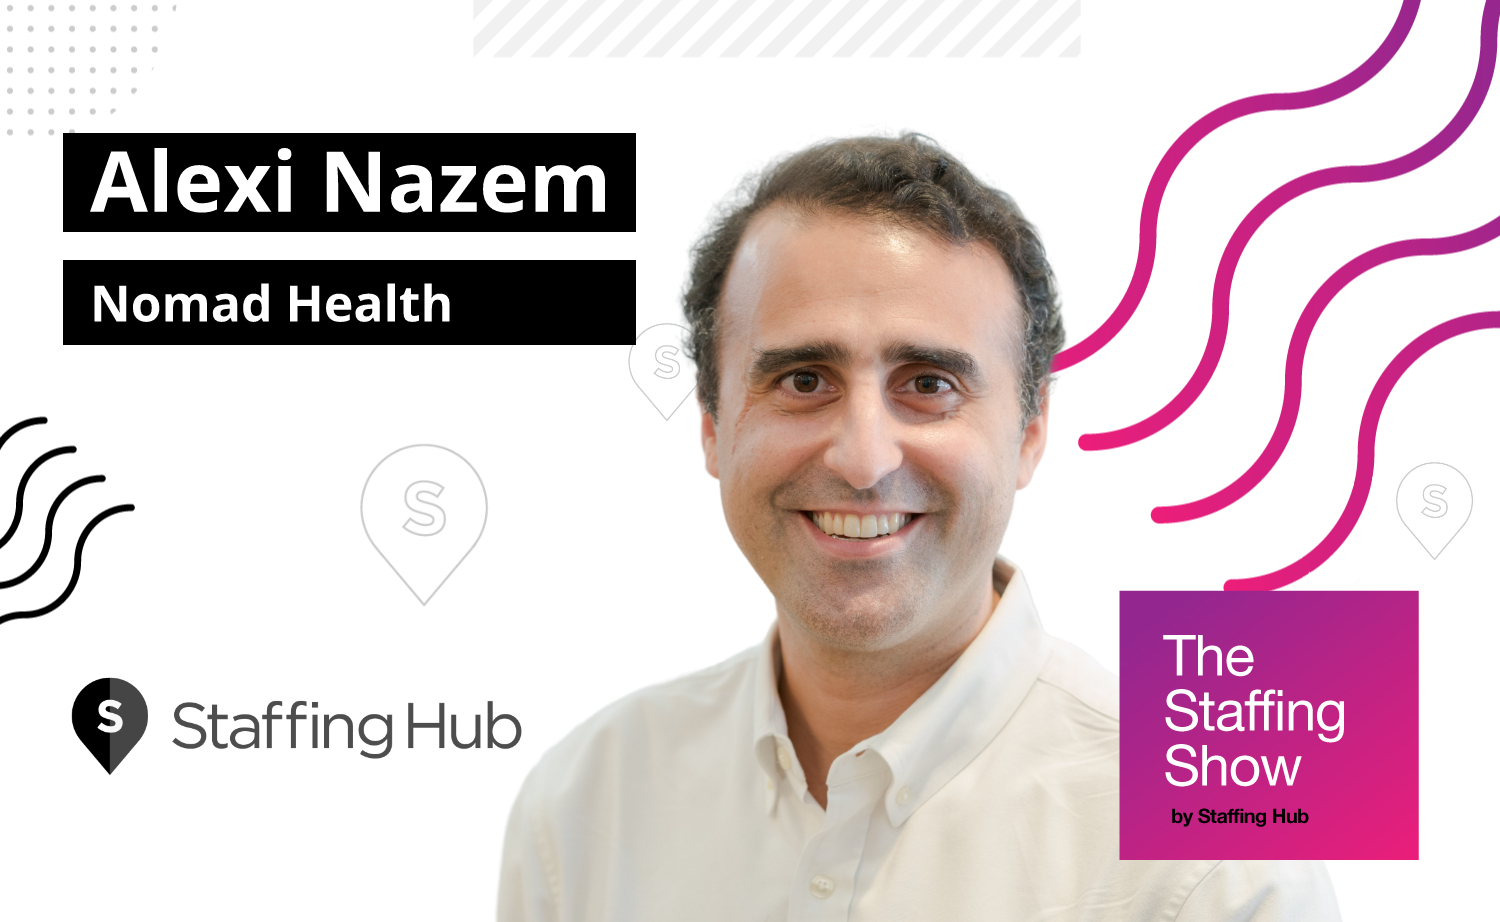 Alexi Nazem, Co-Founder and CEO at Nomad Health, on Technology’s Impact on the Staffing Industry